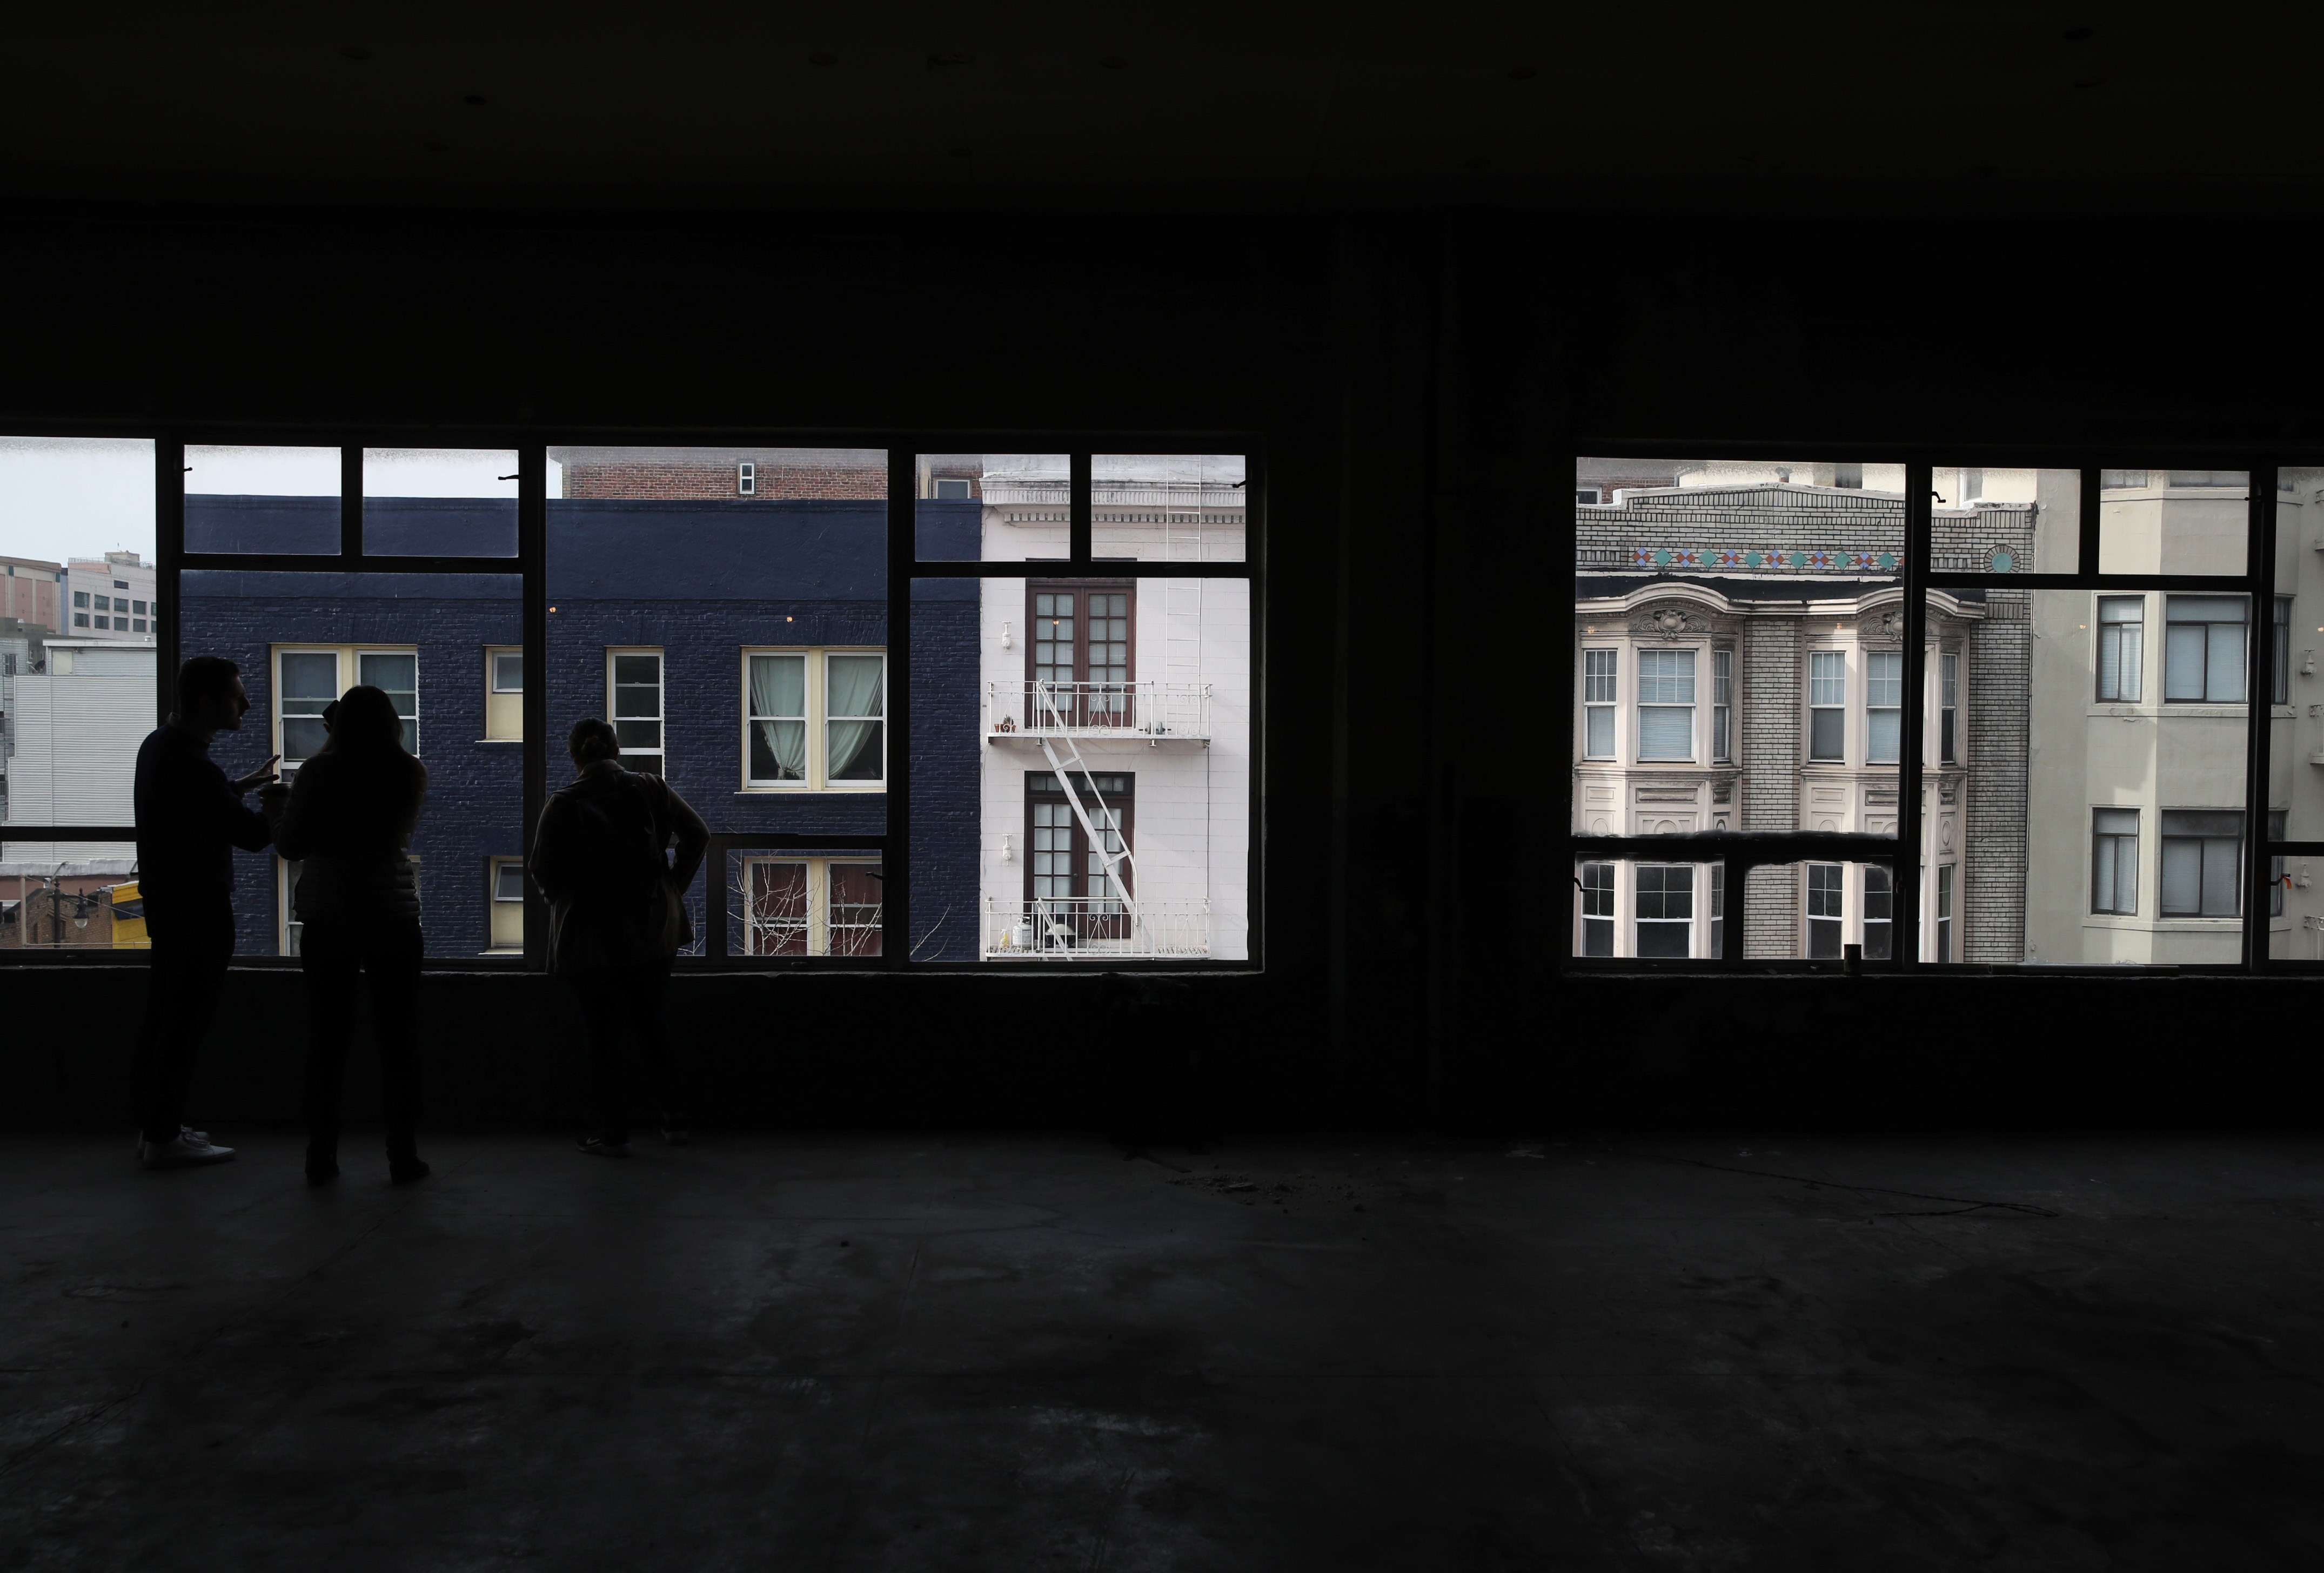 Four silhouettes of people standing in the middle of an almost entirely empty room, looking out a row of windows that make up one entire wall.